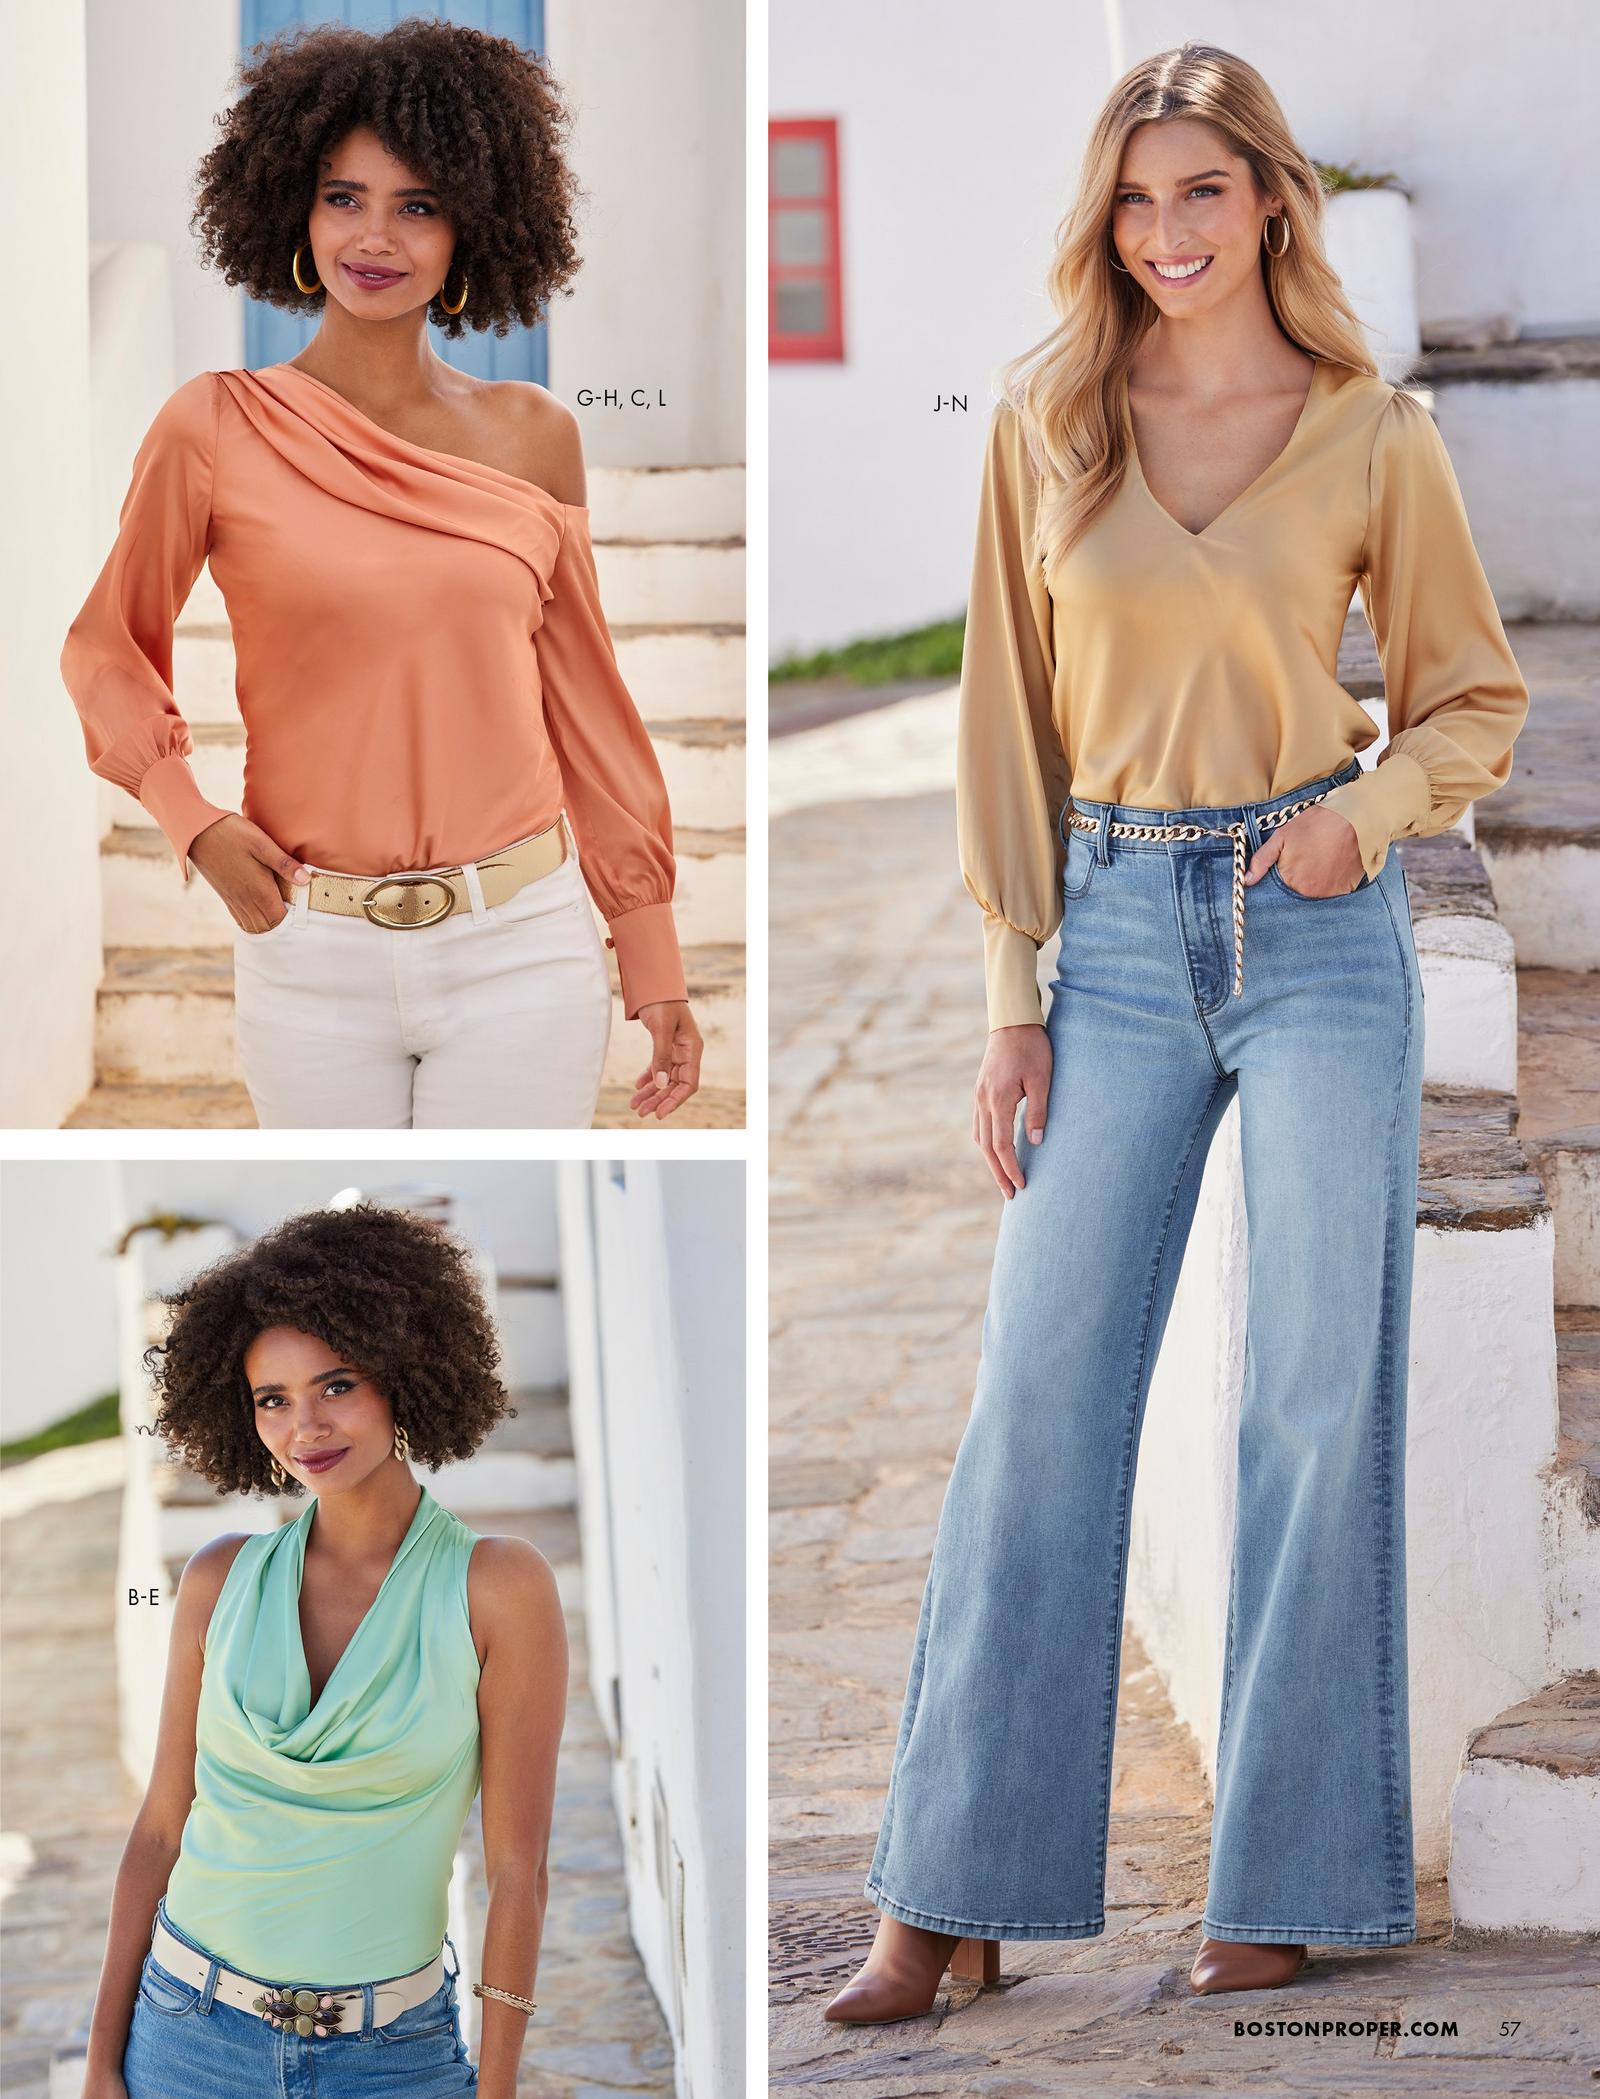 top left model wearing a peach off-the-shoulder long-sleeve charmeuse blouse, gold belt, gold hoop earrings, and white jeans. bottom left model wearing a light green sleeveless cowl neck charmeuse blouse, stone embellished belt, jeans, and gold chain earrings. right model wearing a tan v-neck long-sleeve charmeuse blouse, gold chain belt, gold hoop earrings, palazzo jeans, and gold leather heeled booties.